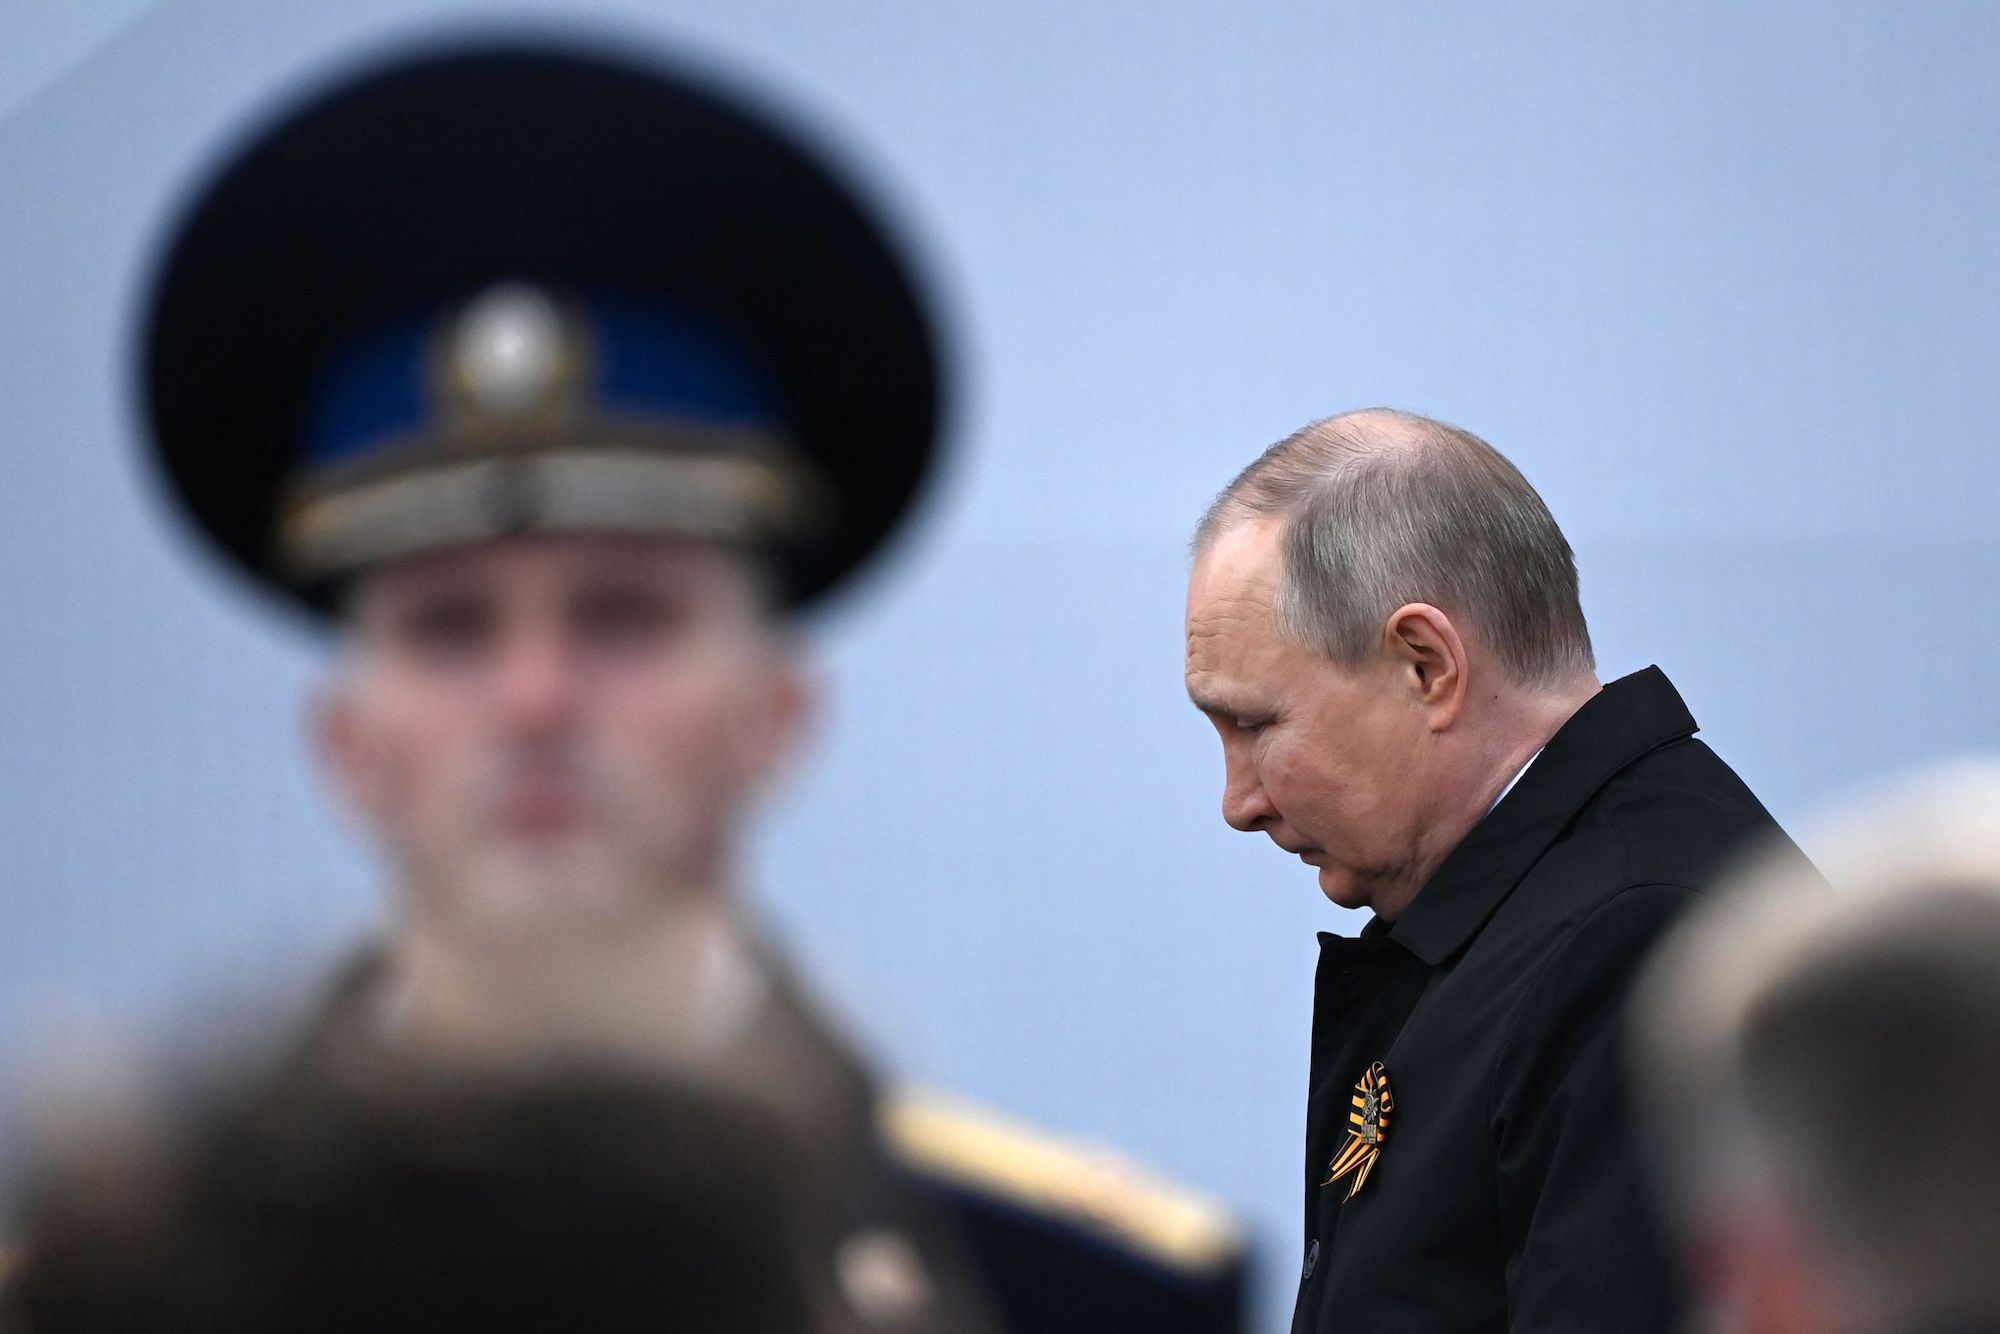 Russian President Vladimir Putin arrives to watch the Victory Day military parade at Red Square in Moscow on May 9, 2022.